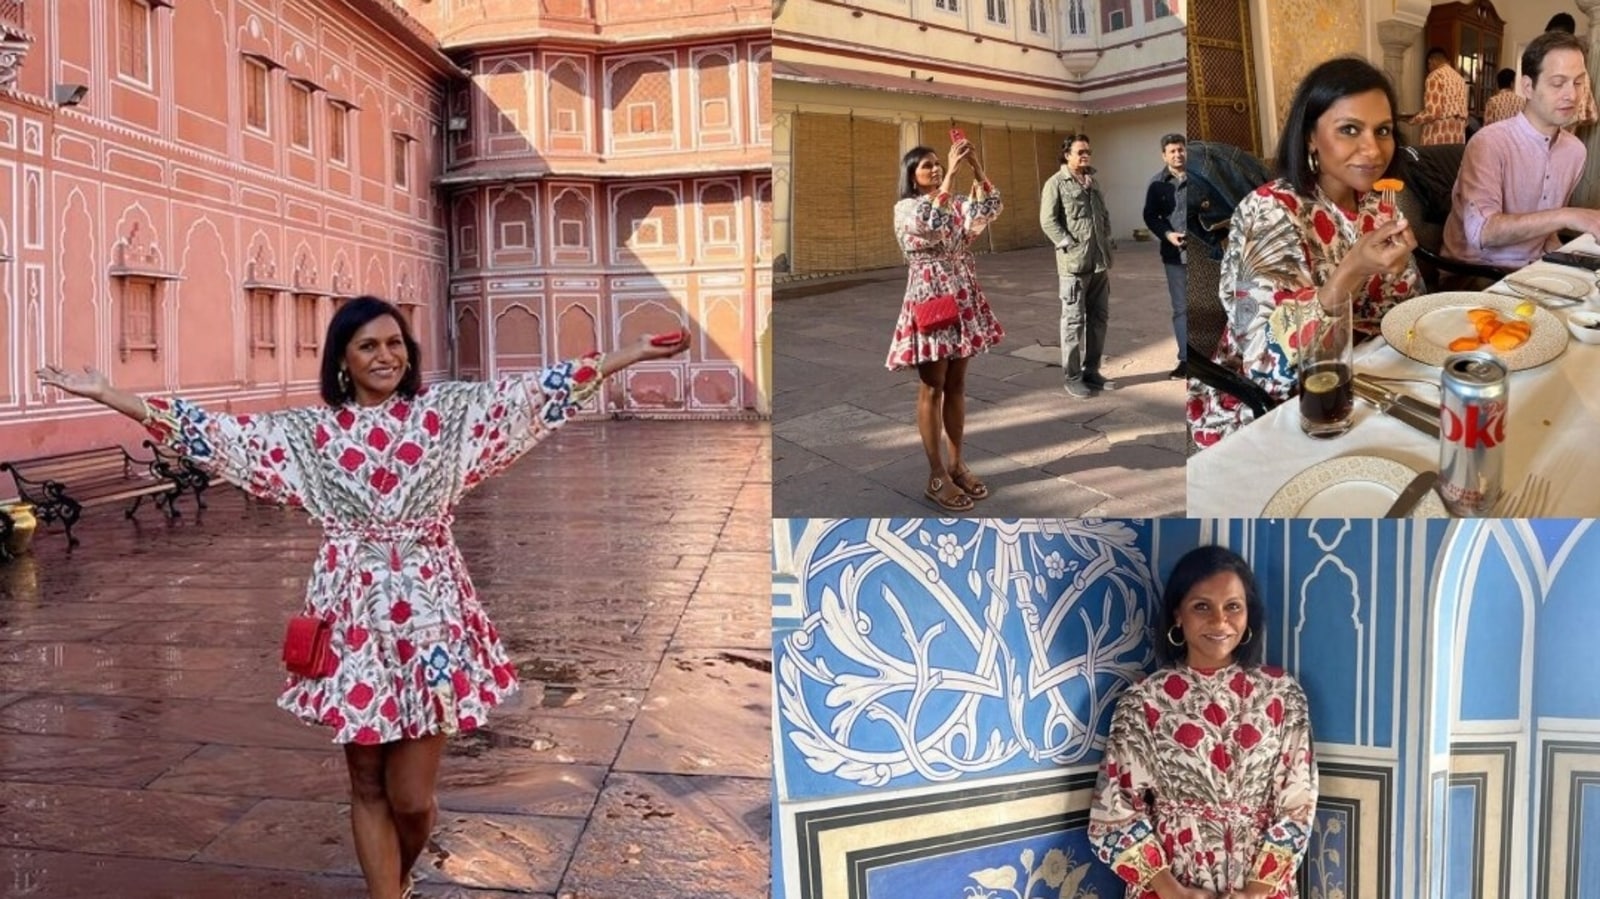 Mindy Kaling takes in Jaipur. Is she scouting locations for upcoming rom-com with Priyanka Chopra?